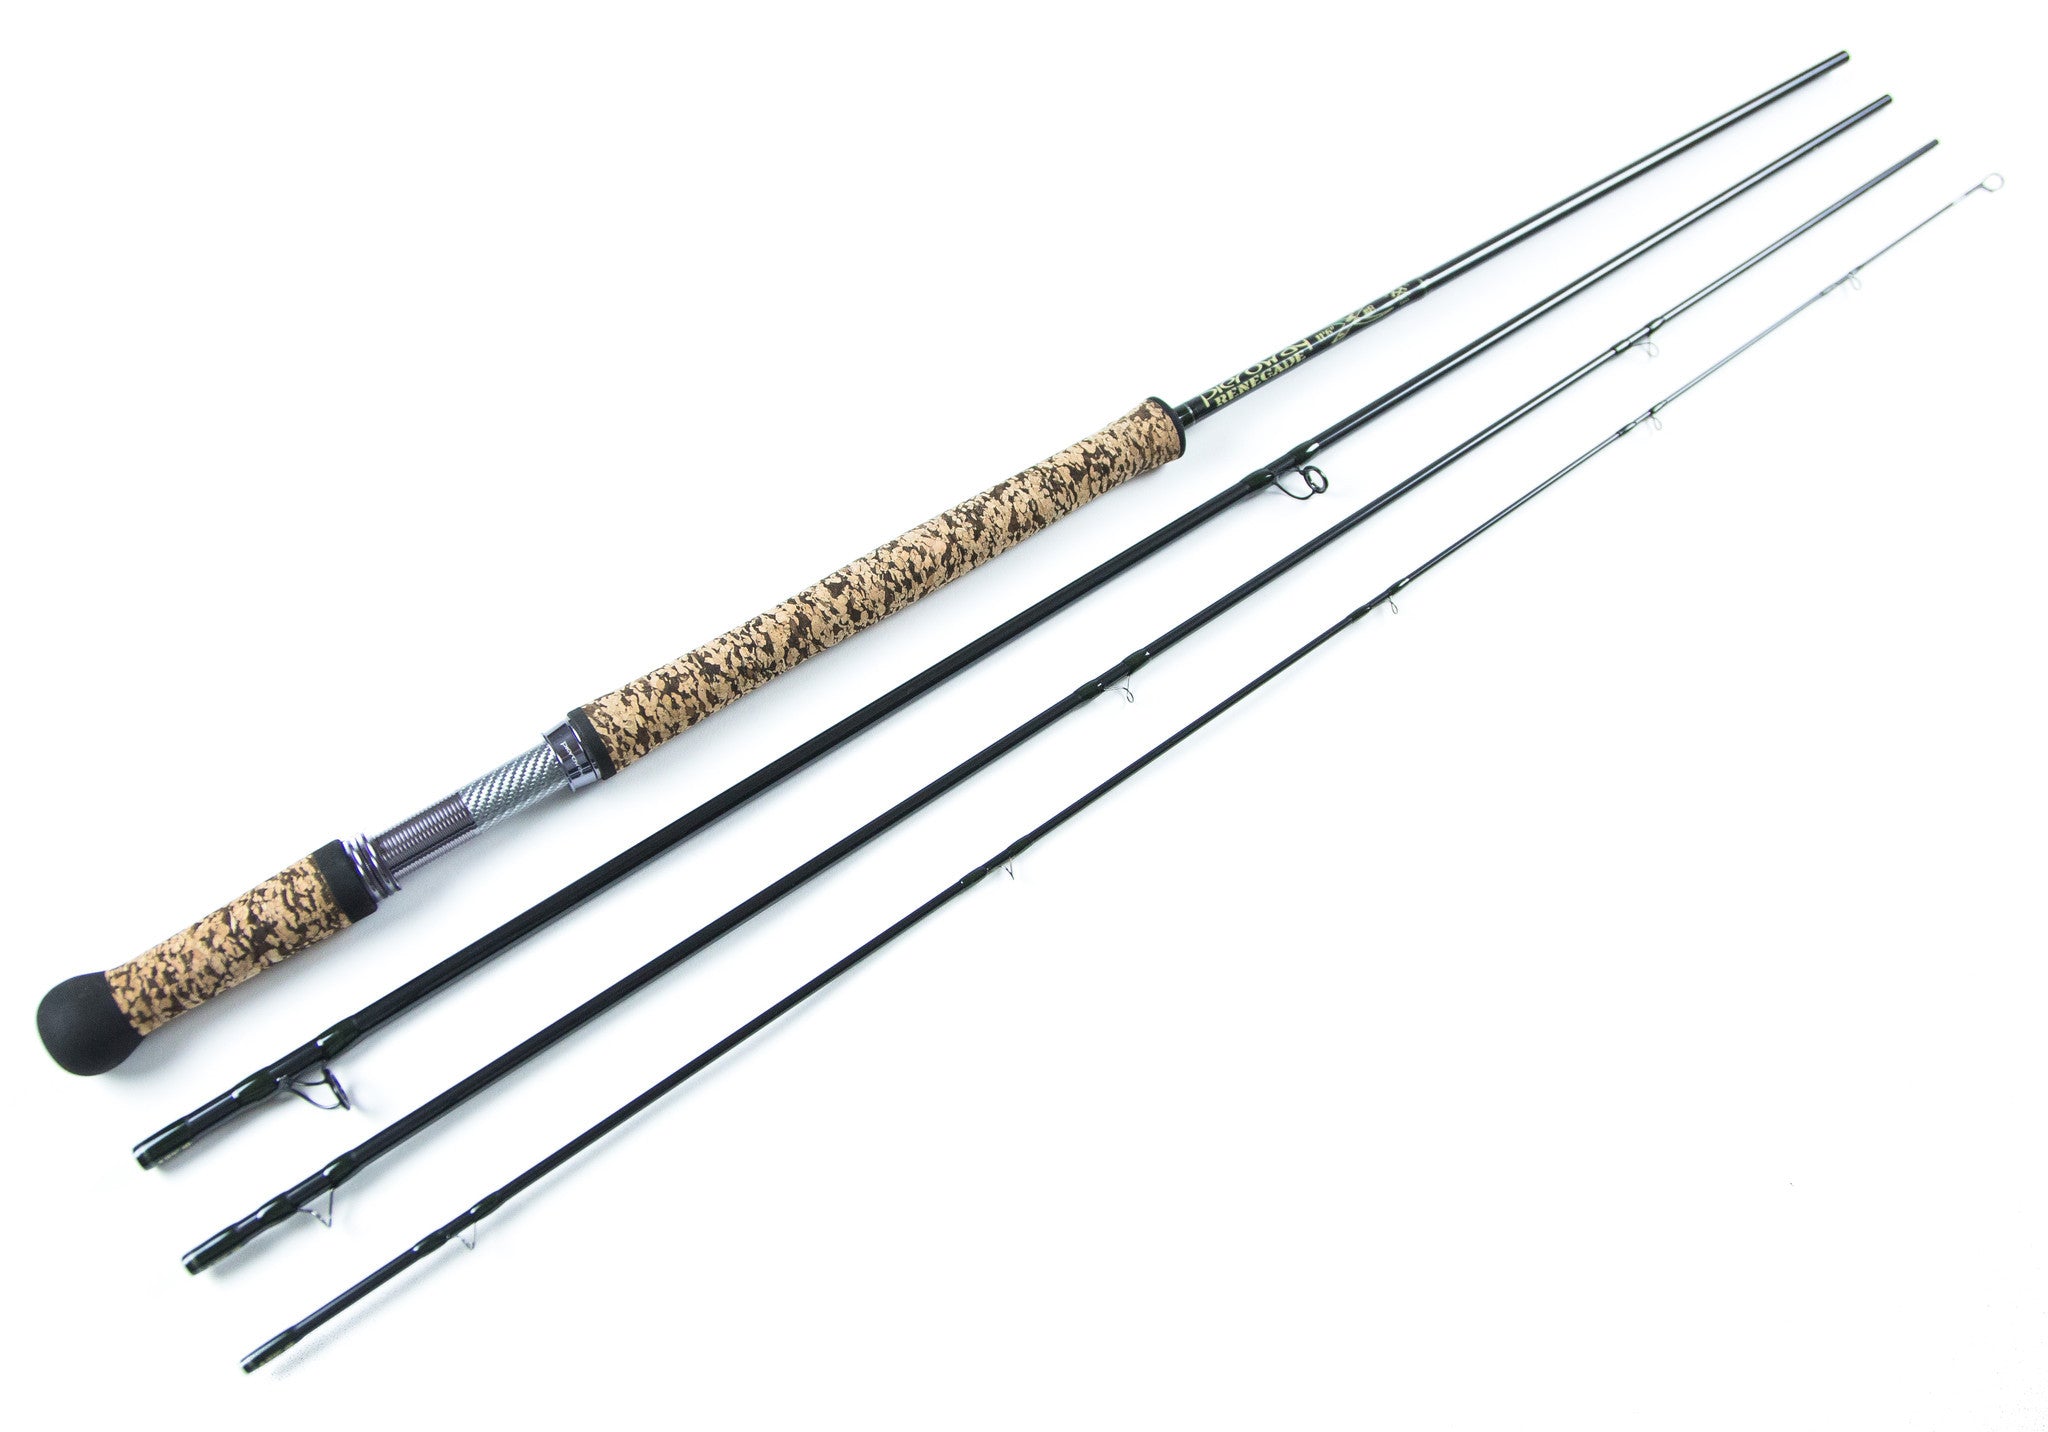 Jerry French Explains the Renegade Rod Series - Ashland Fly Shop